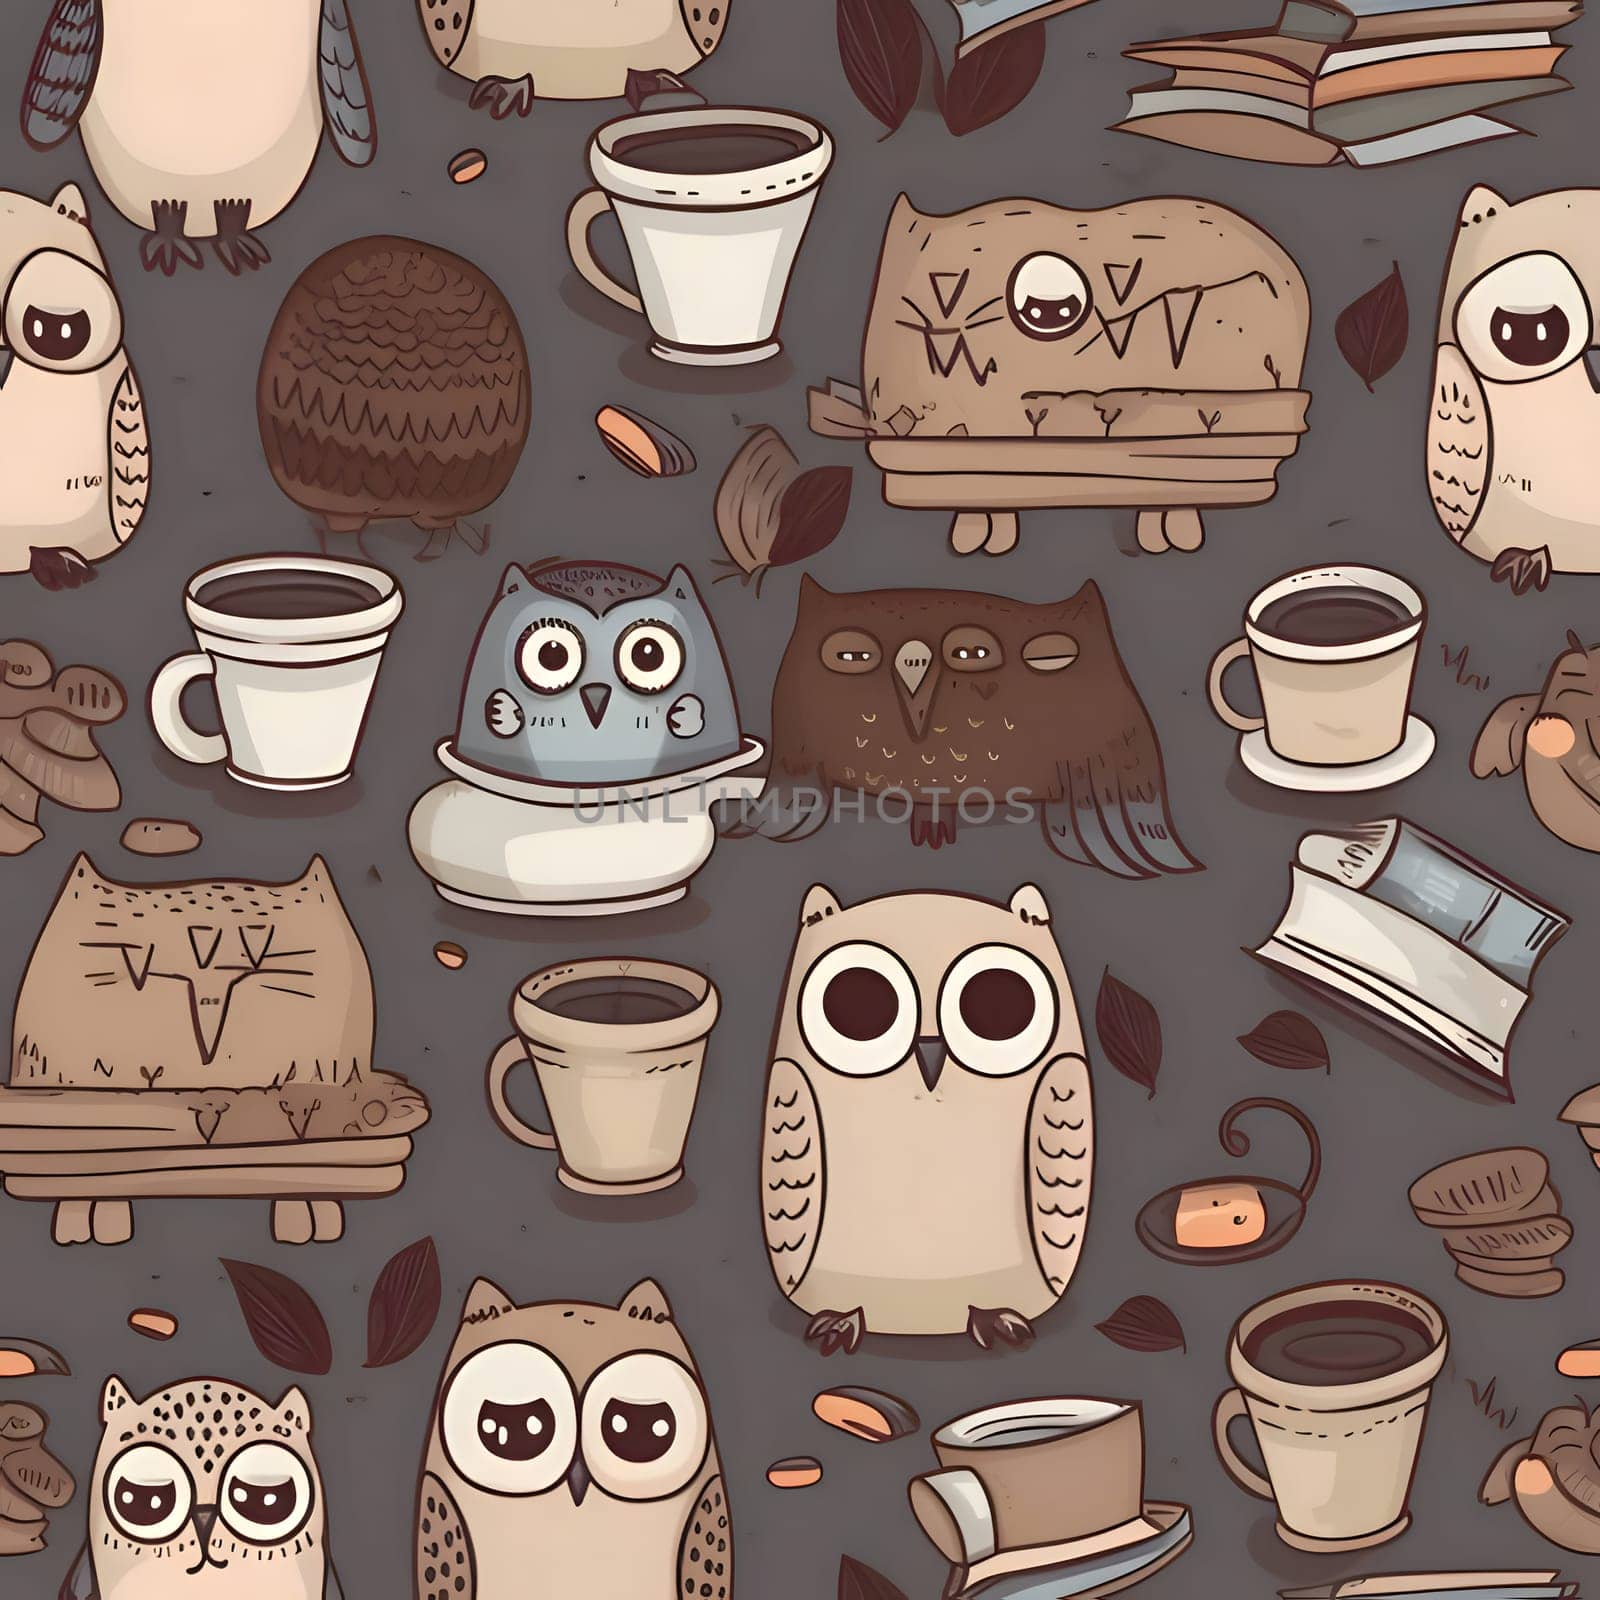 Patterns and banners backgrounds: Cute hand drawn seamless pattern with cartoon owls and coffee. Vector illustration.